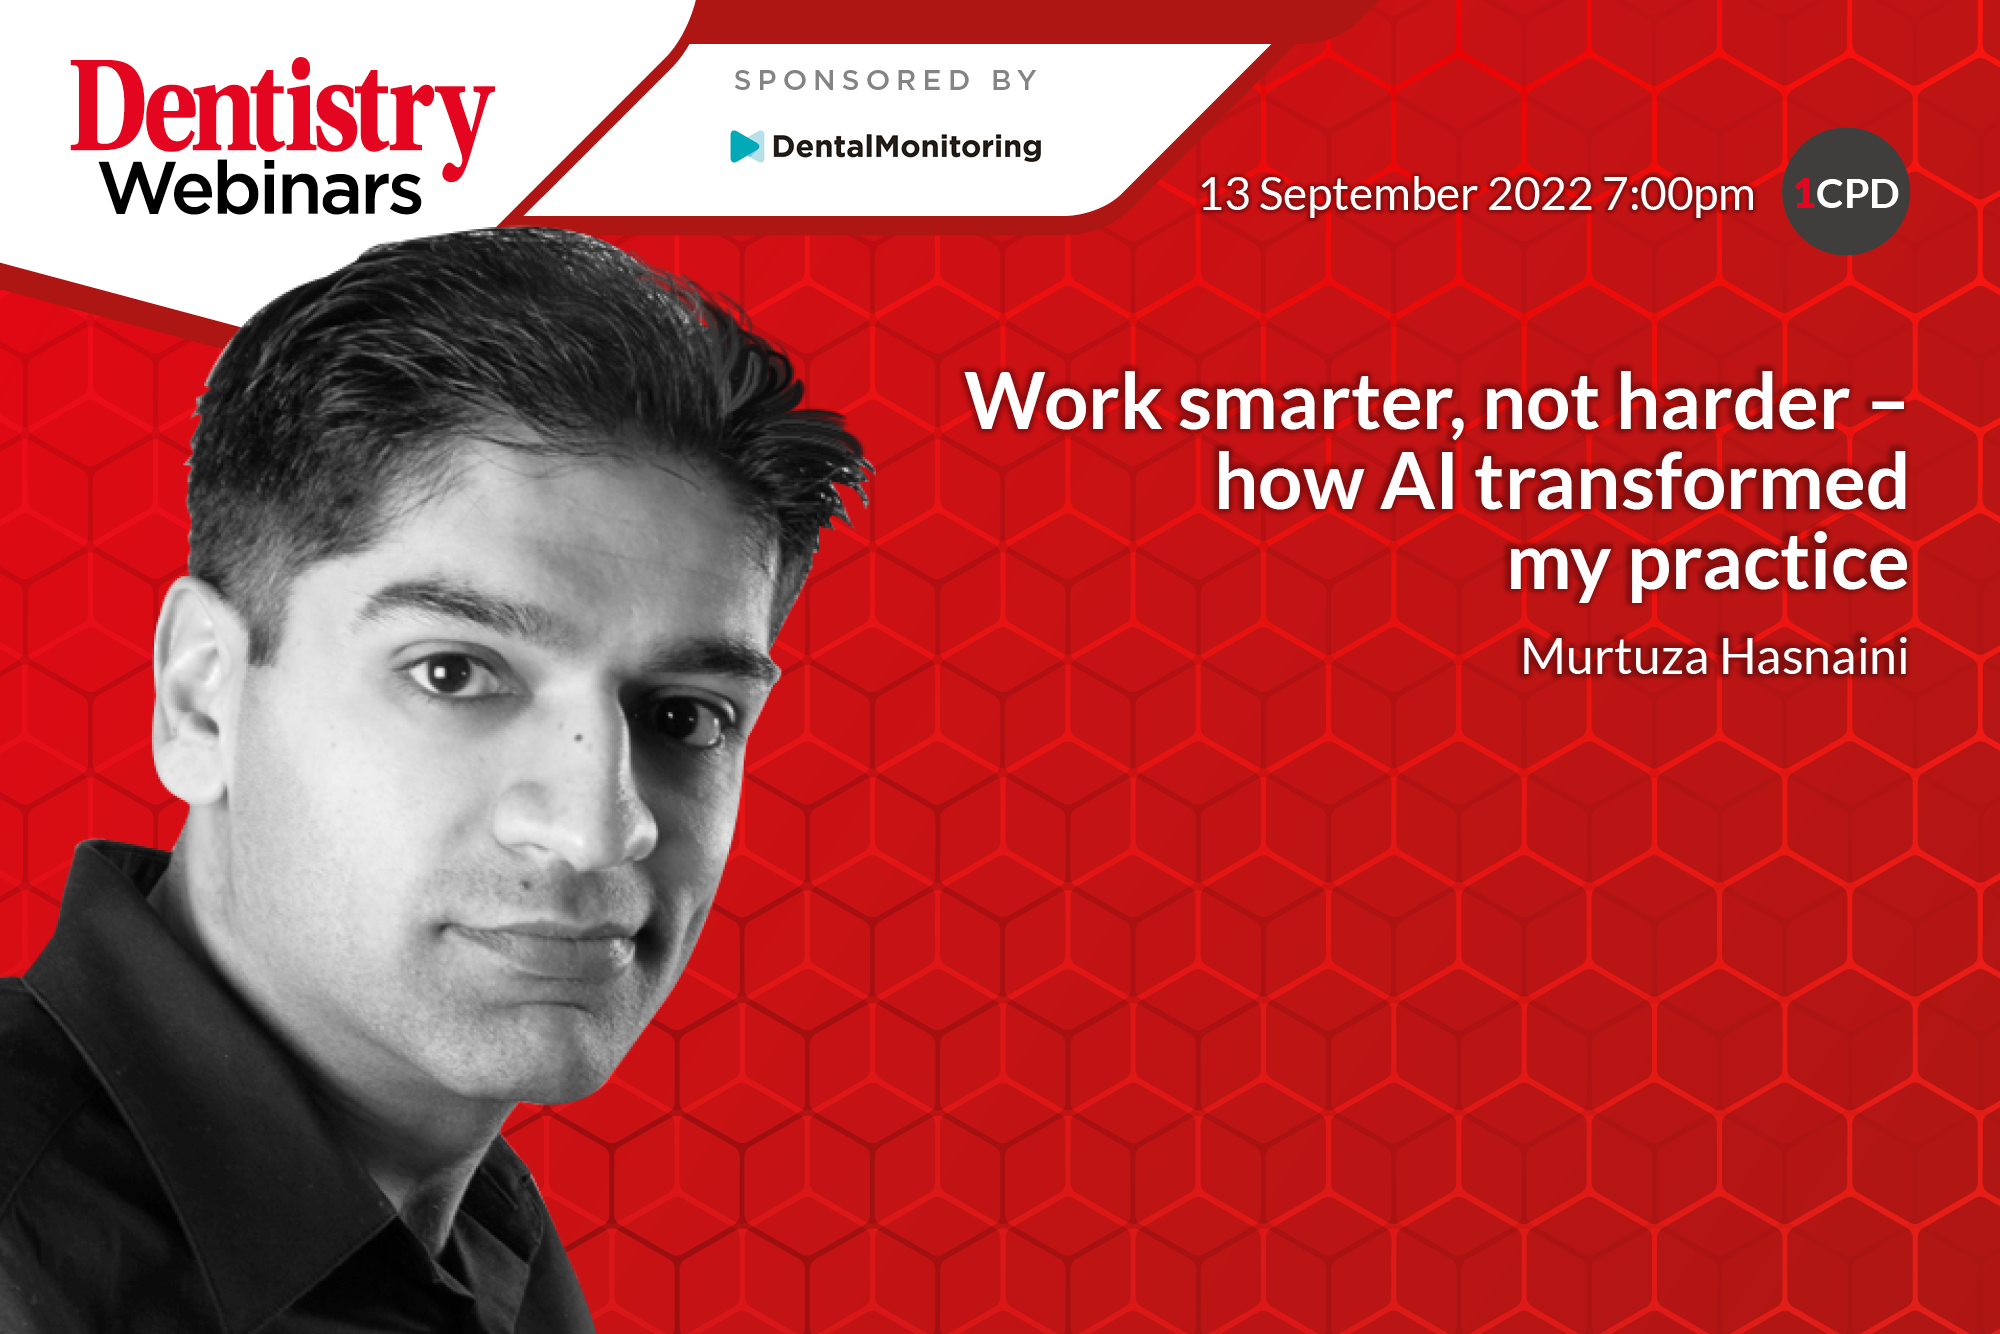 Join Dr Murtuza Hasnaini's webinar on 13 September as he discusses how AI transformed his practice.